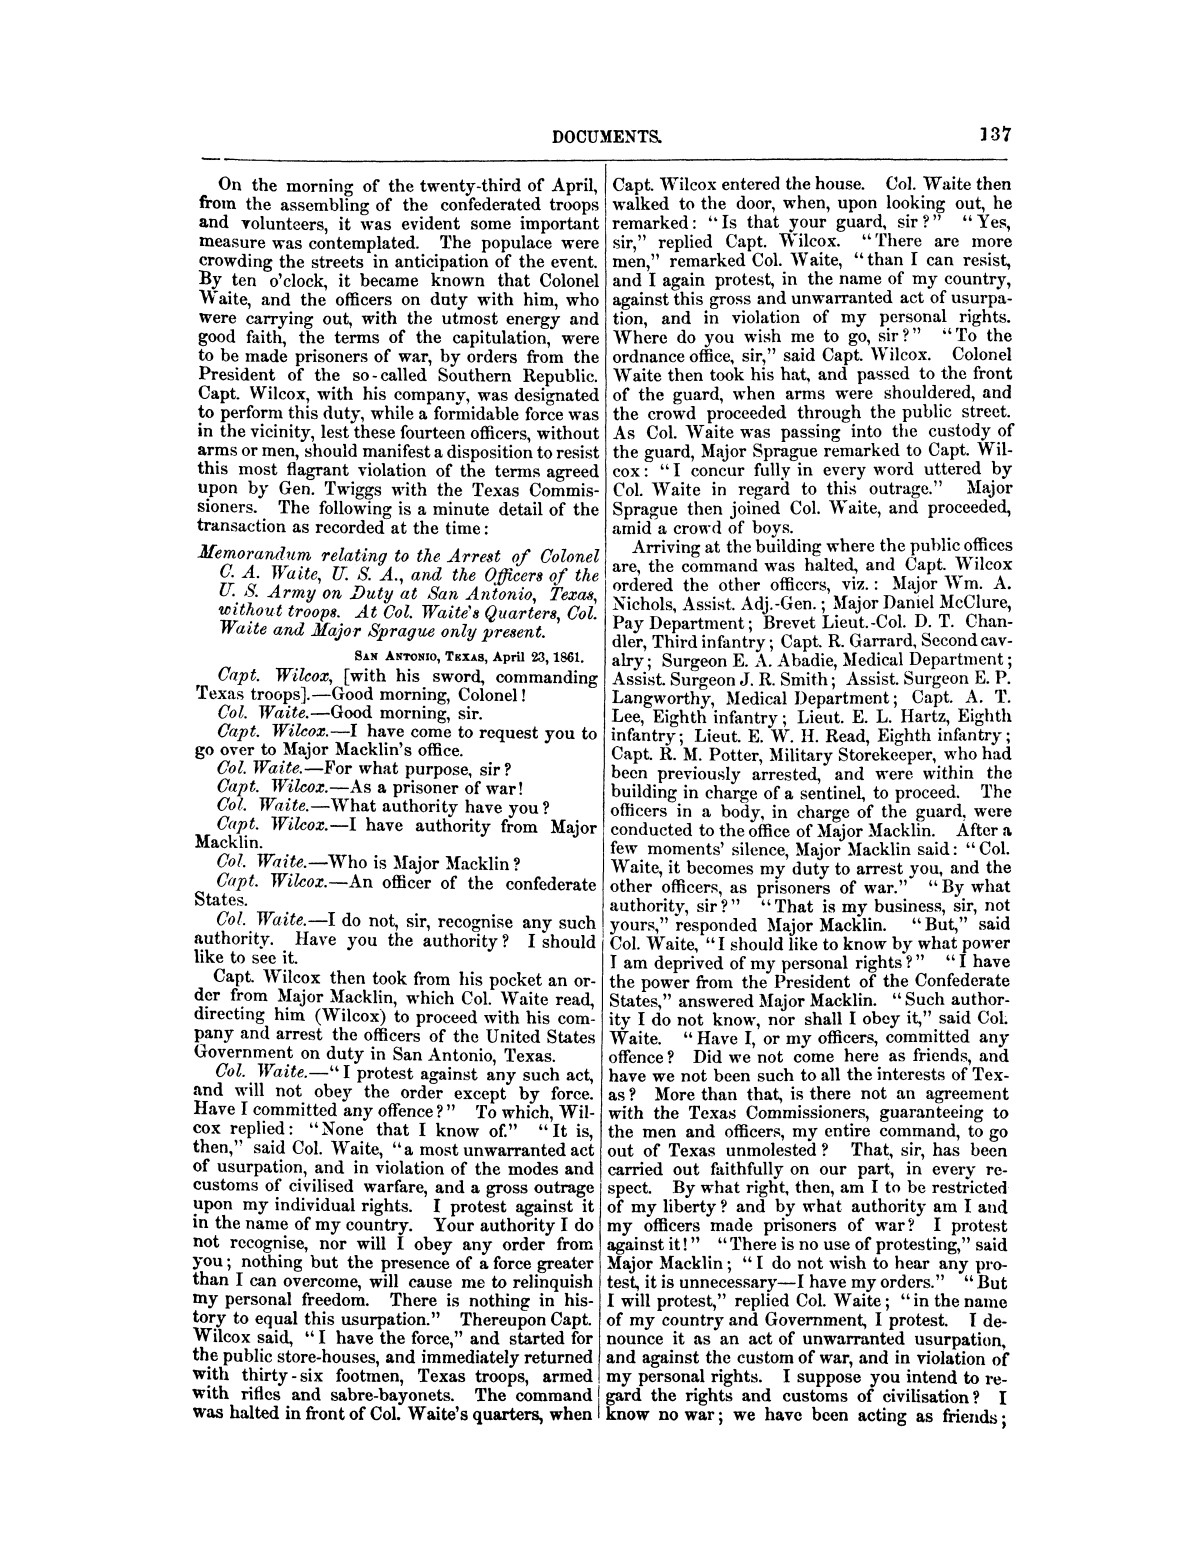 The treachery in Texas, the secession of Texas, and the arrest of the United States officers and soldiers serving in Texas. Read before the New-York Historical Society, June 25, 1861. By Major J. T. Sprague, U. S. A.
                                                
                                                    [Sequence #]: 31 of 36
                                                